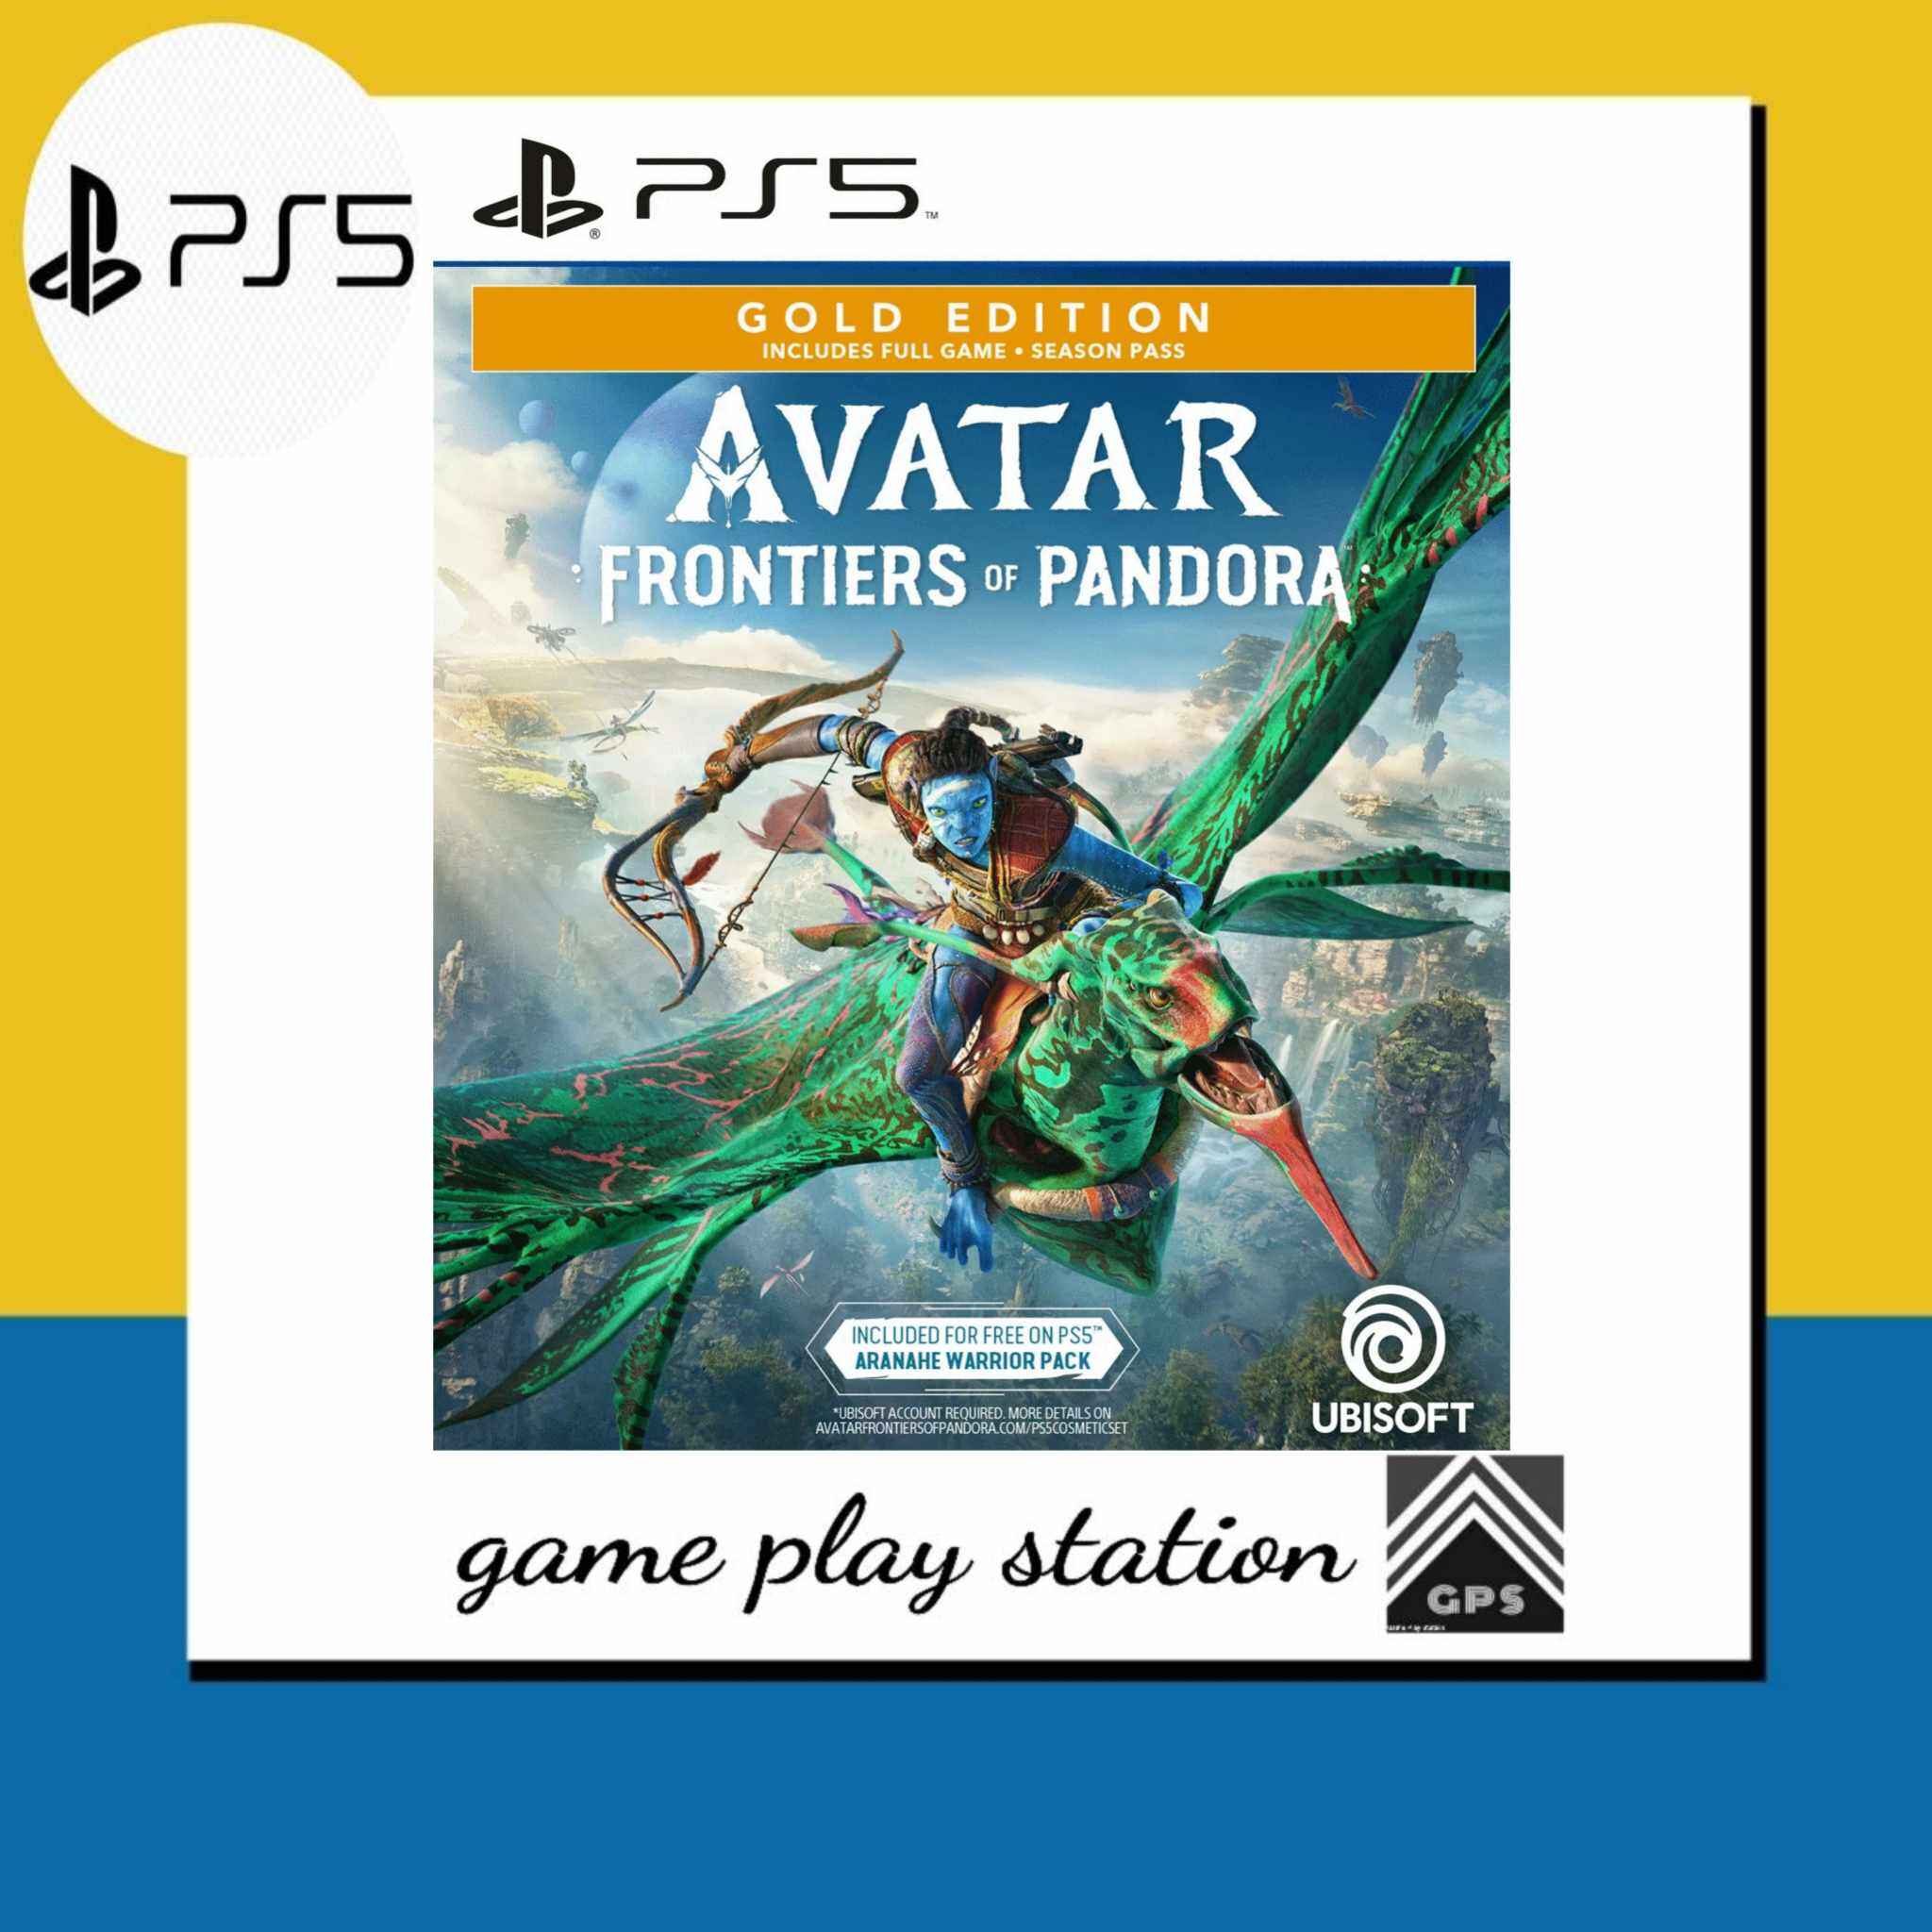 PS5 Avatar Frontiers of Pandora Limited Edition Voice English / Korean  Subtitle